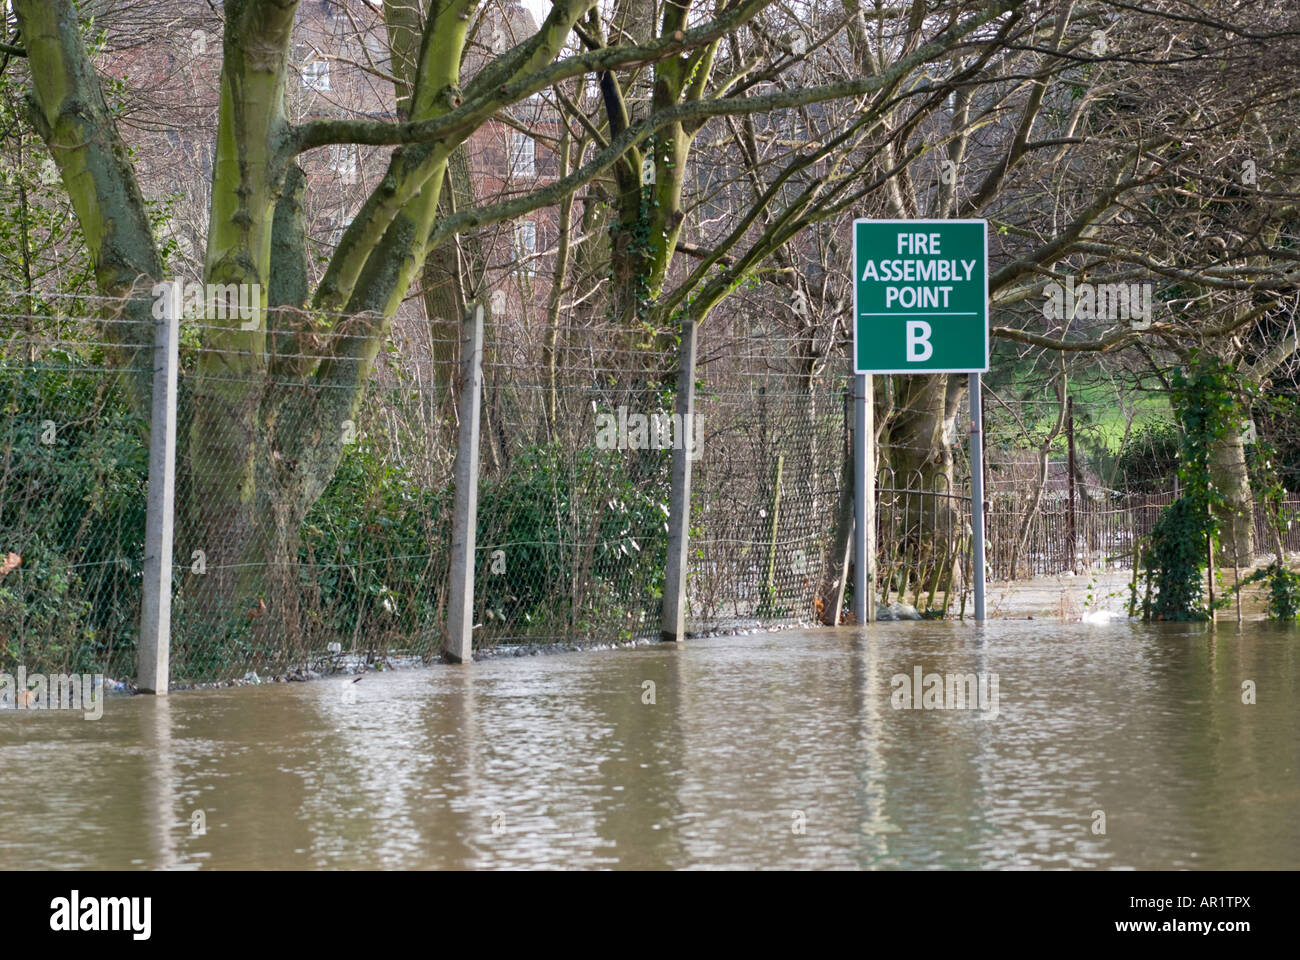 a-fire-assembly-point-sign-surrounded-by-flood-water-stock-photo-alamy